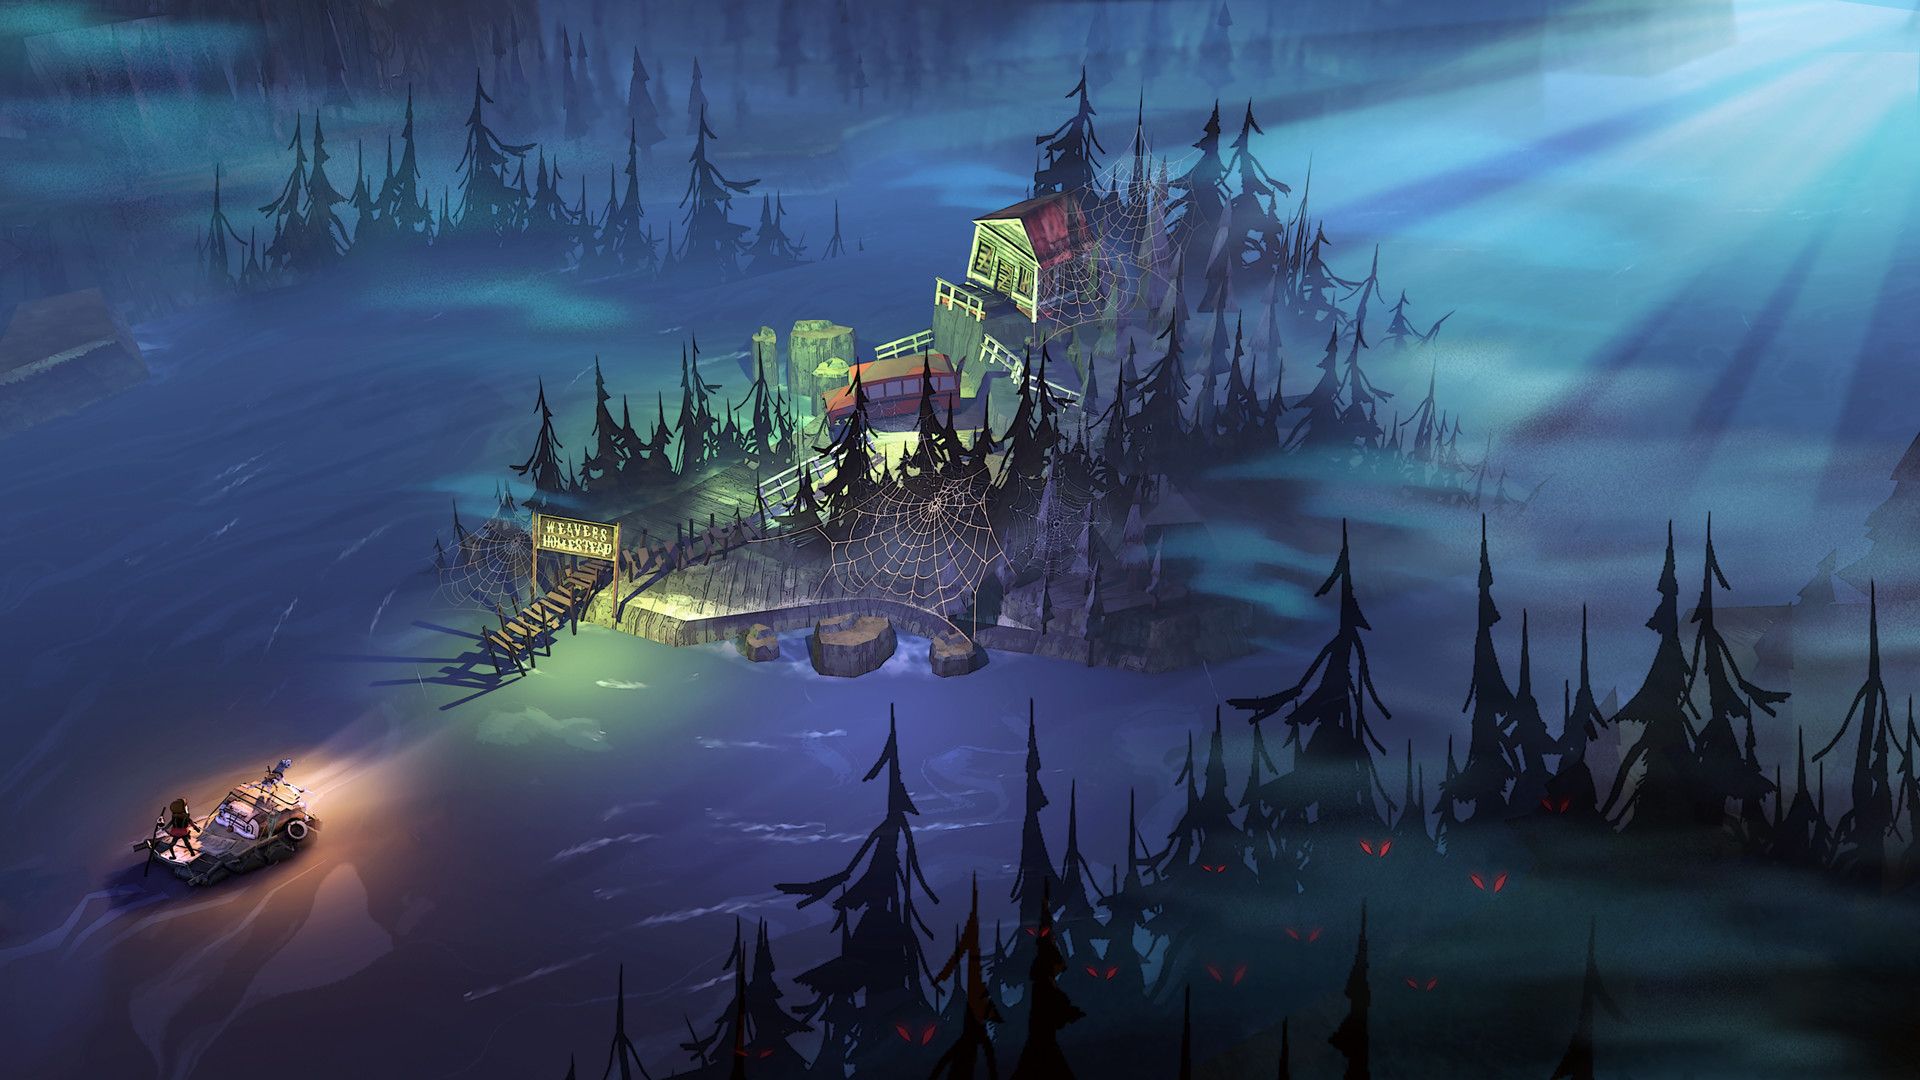 Save 80% on The Flame in the Flood on Steam